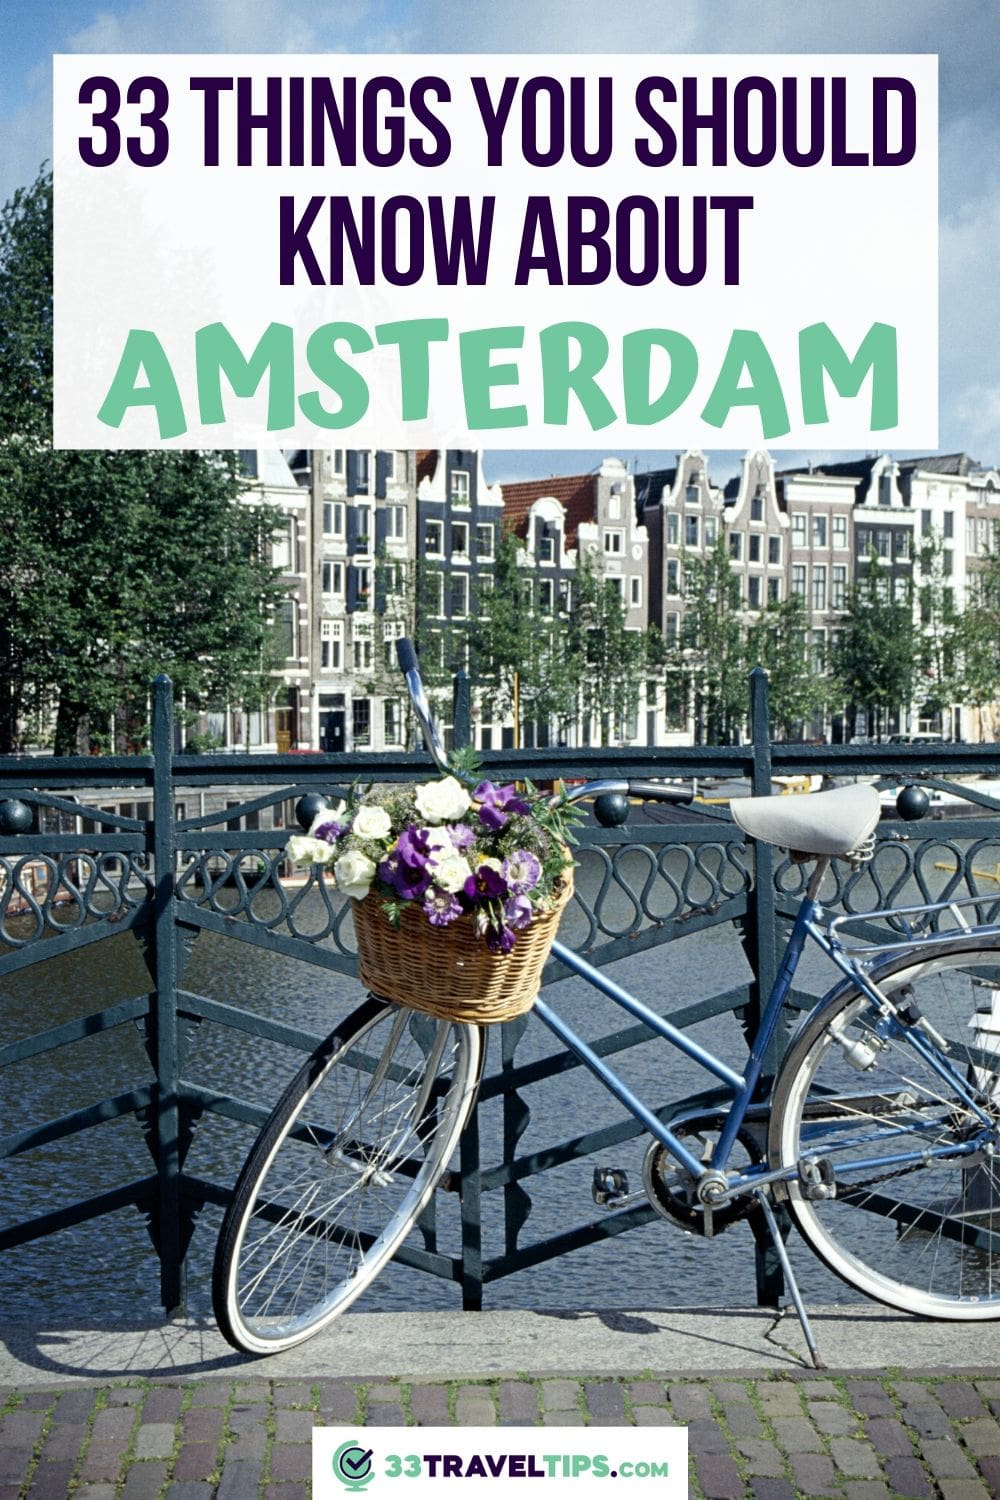 33 Stunning Facts About Amsterdam Sex Drugs And Canals